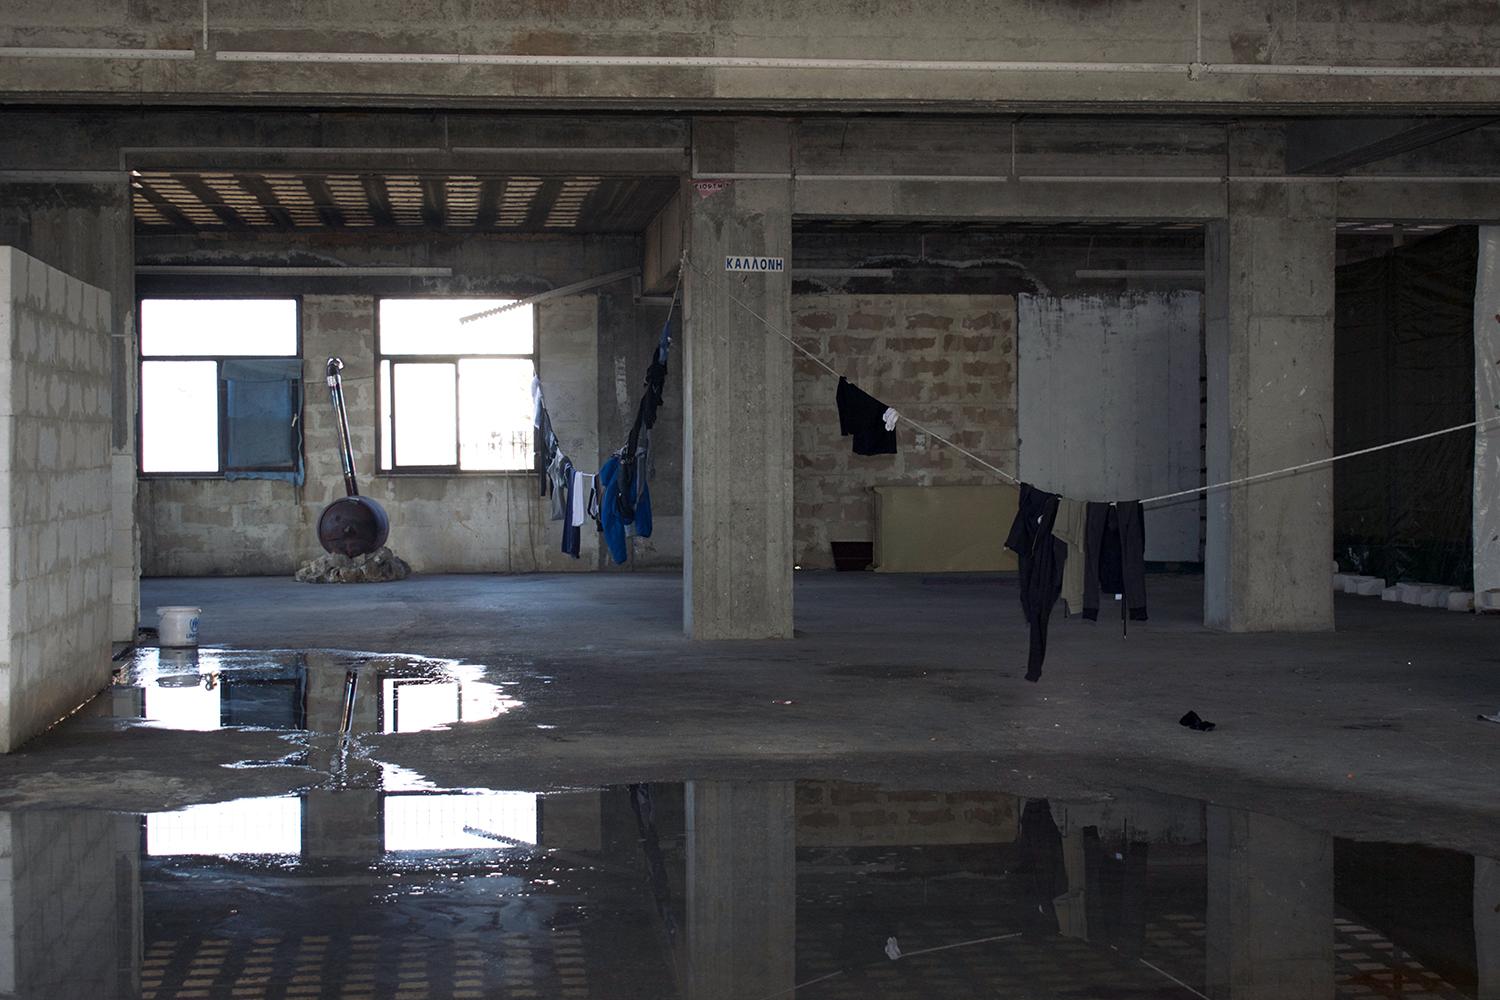 A refugee squat in an abandoned factory on Lesbos, Greece, where dozens of asylum seekers are living in fear of being forcibly returned to Turkey under the EU-Turkey deal. 